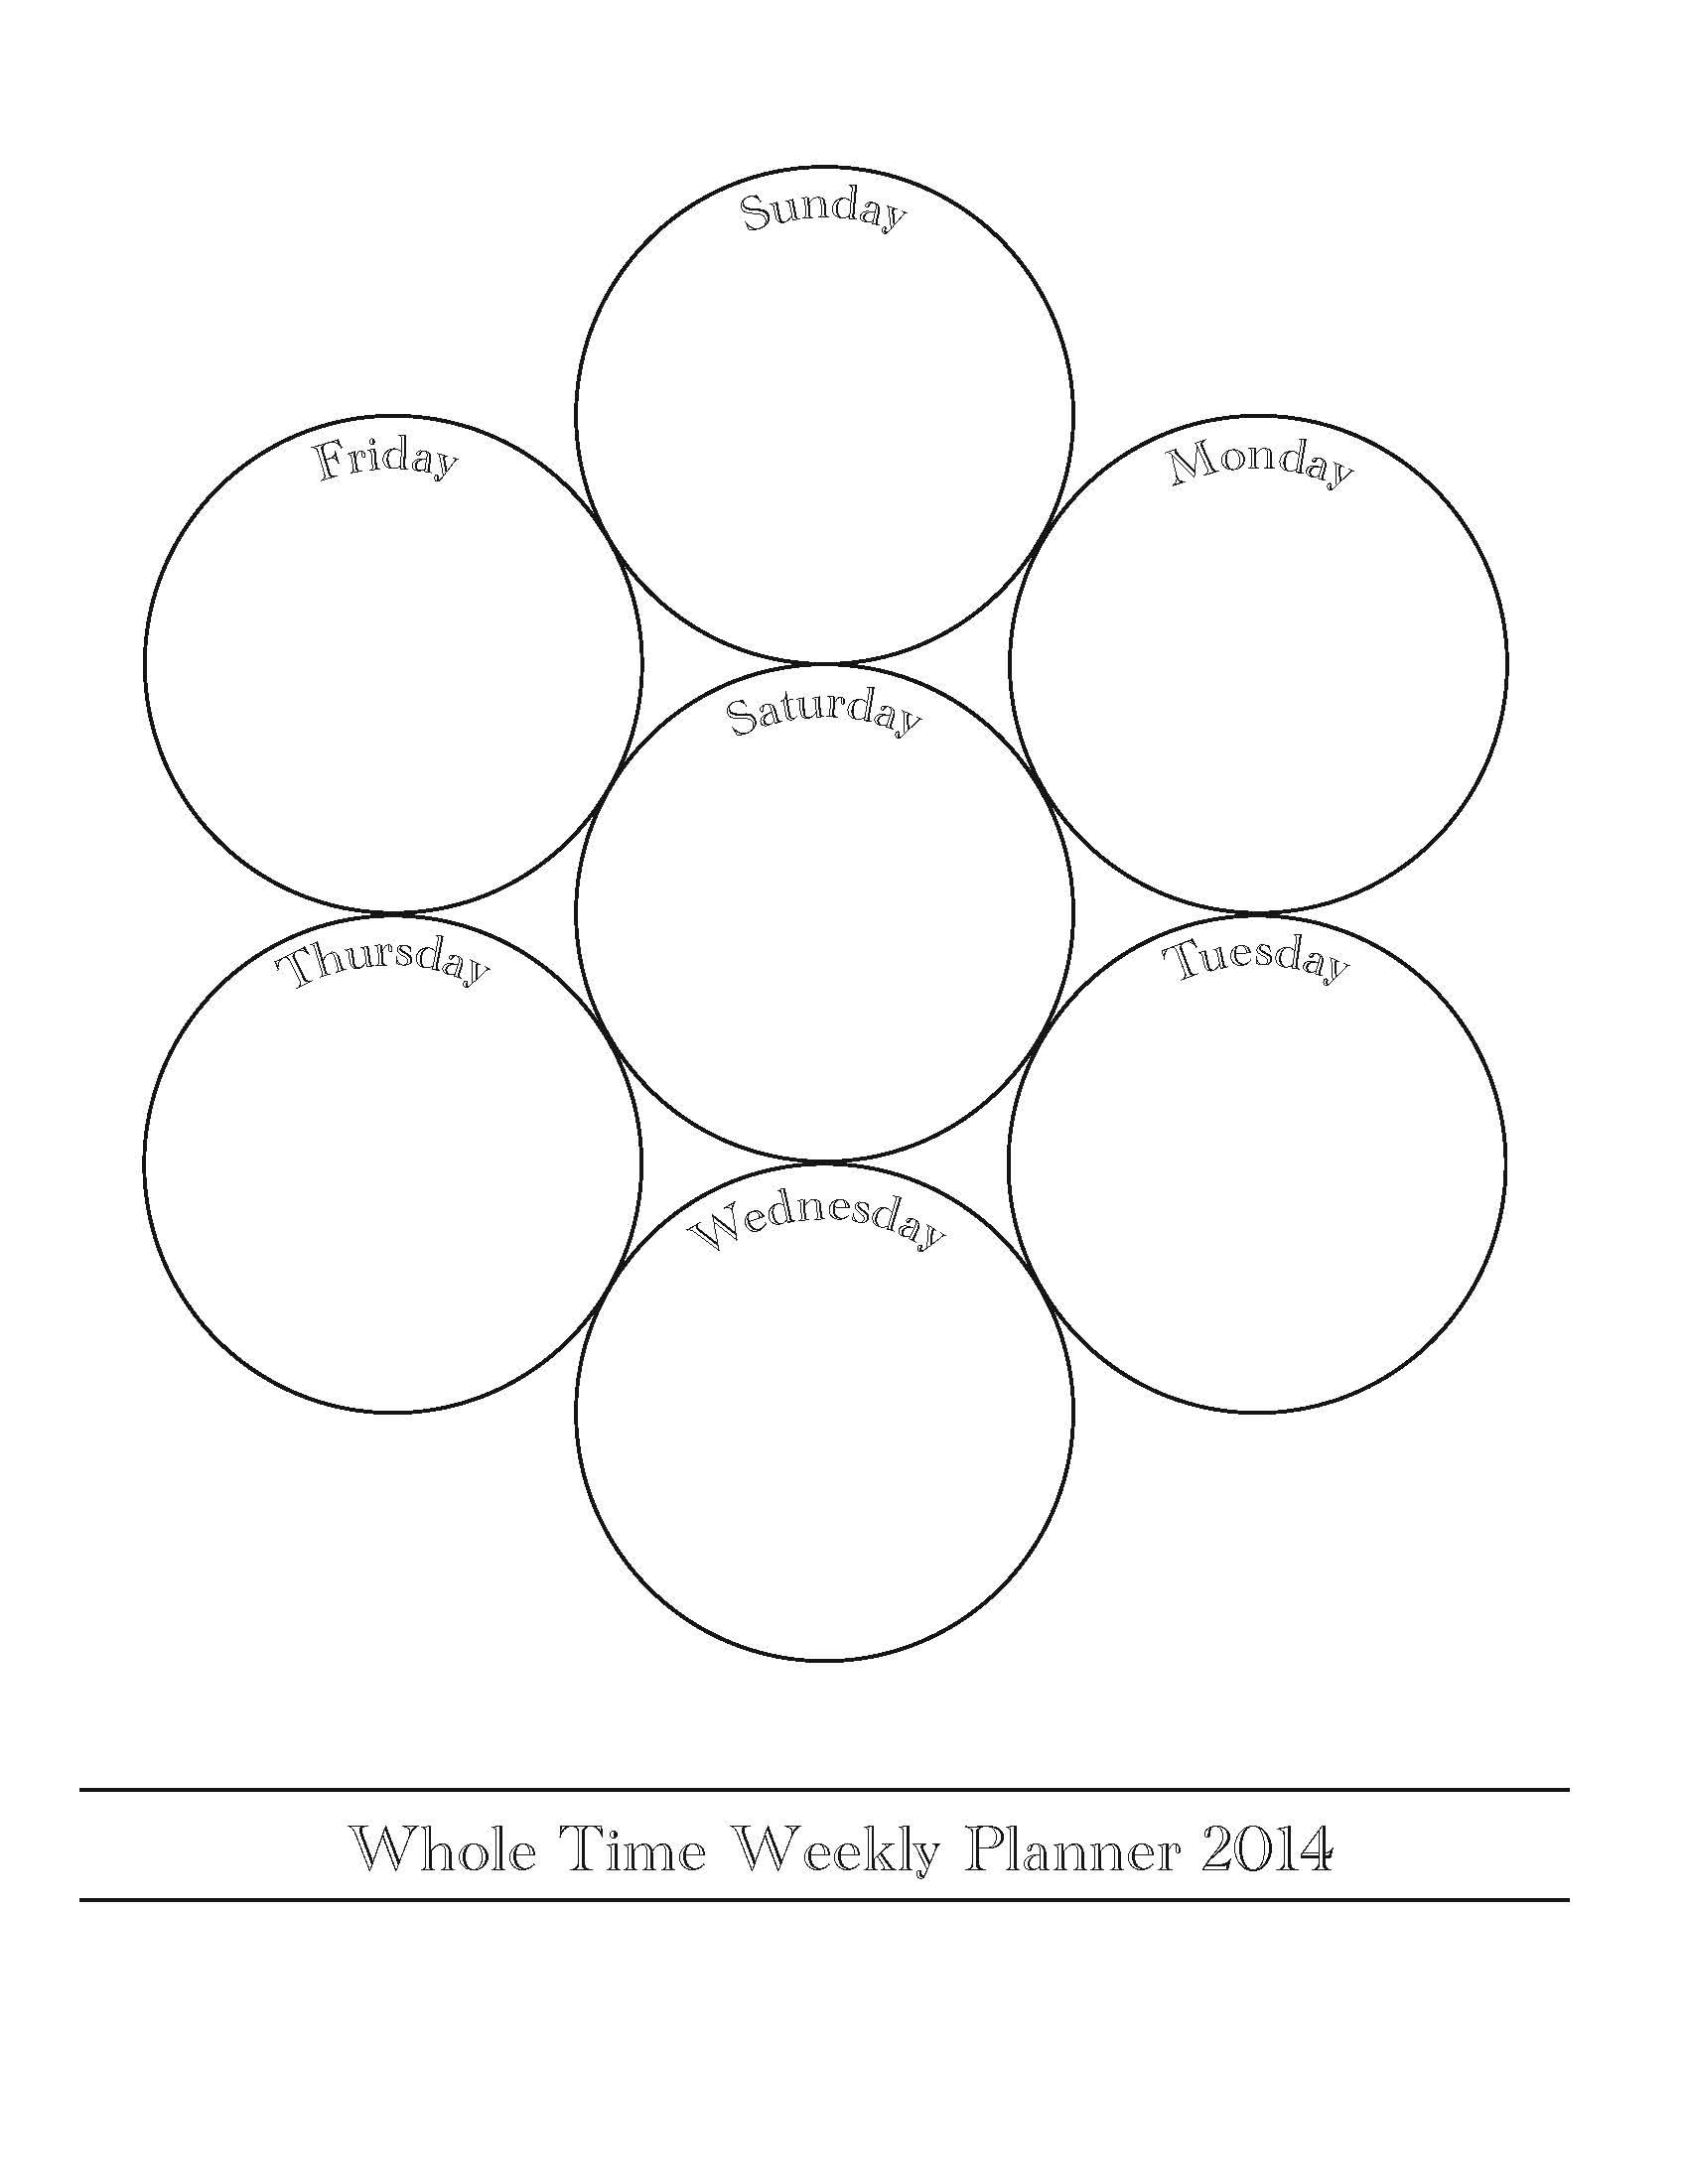 2014 Whole Time Weekly Planner